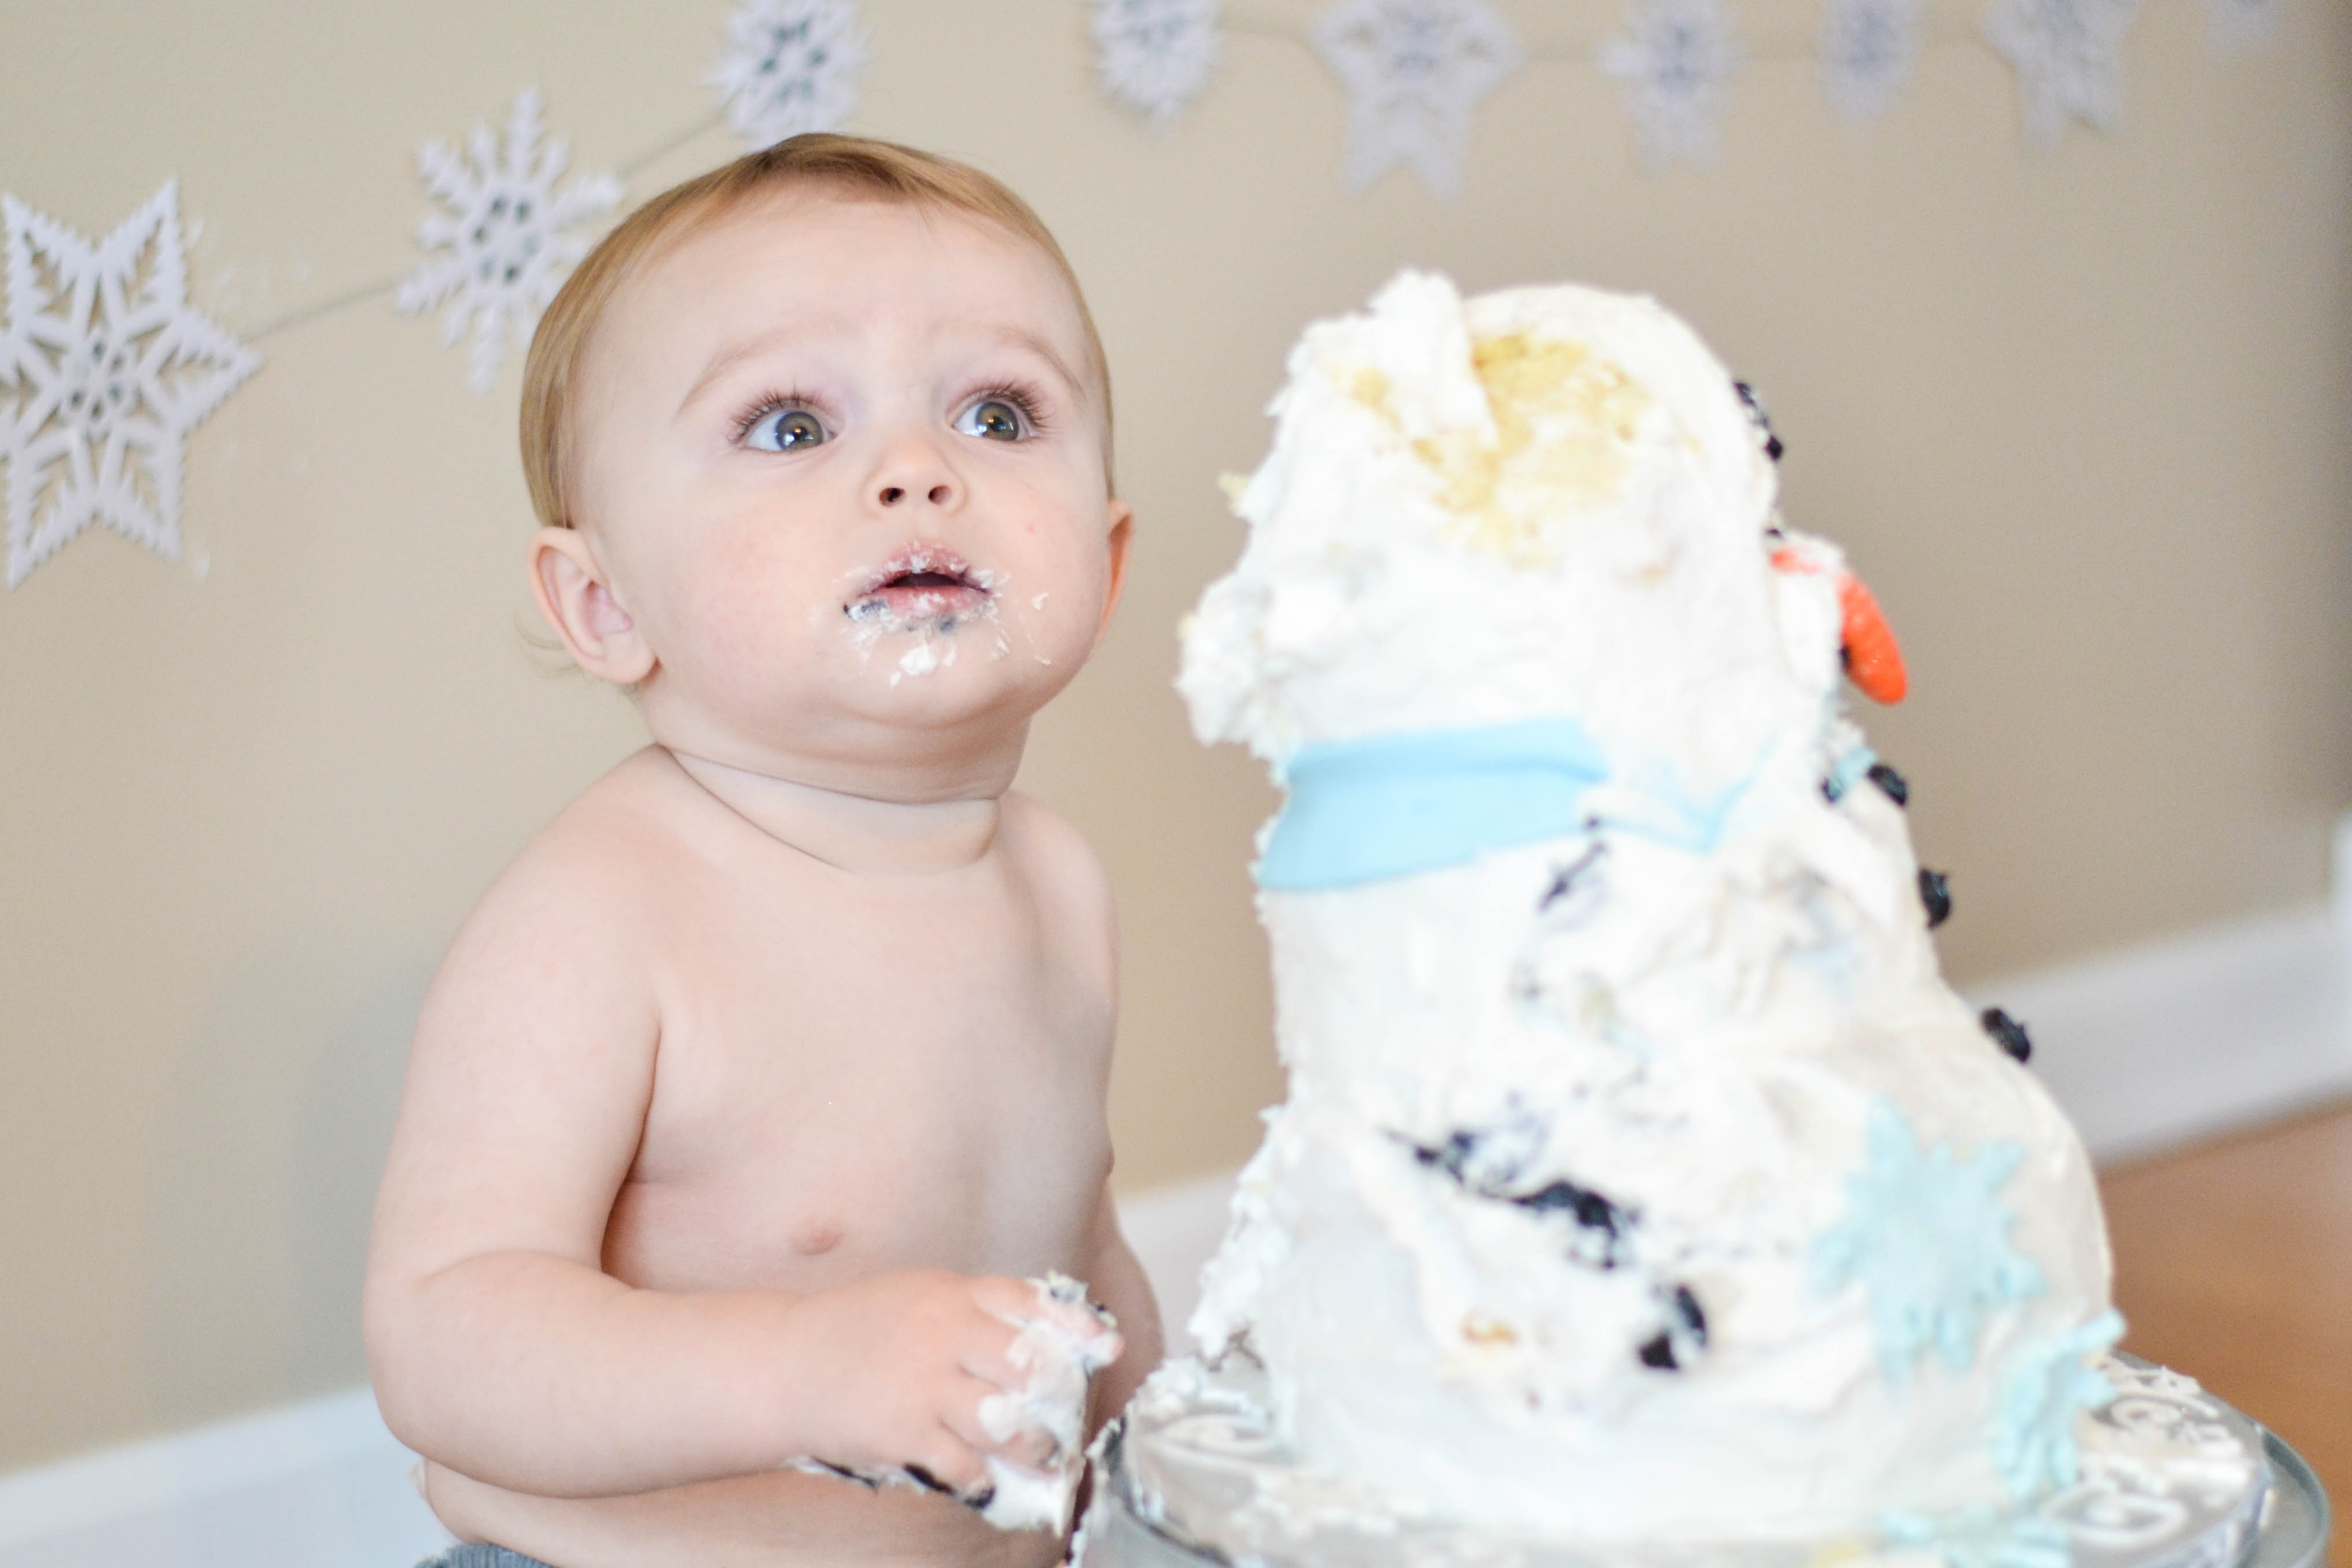 cake smash tips and ticks! This post has a ton of great ideas and suggestions!!